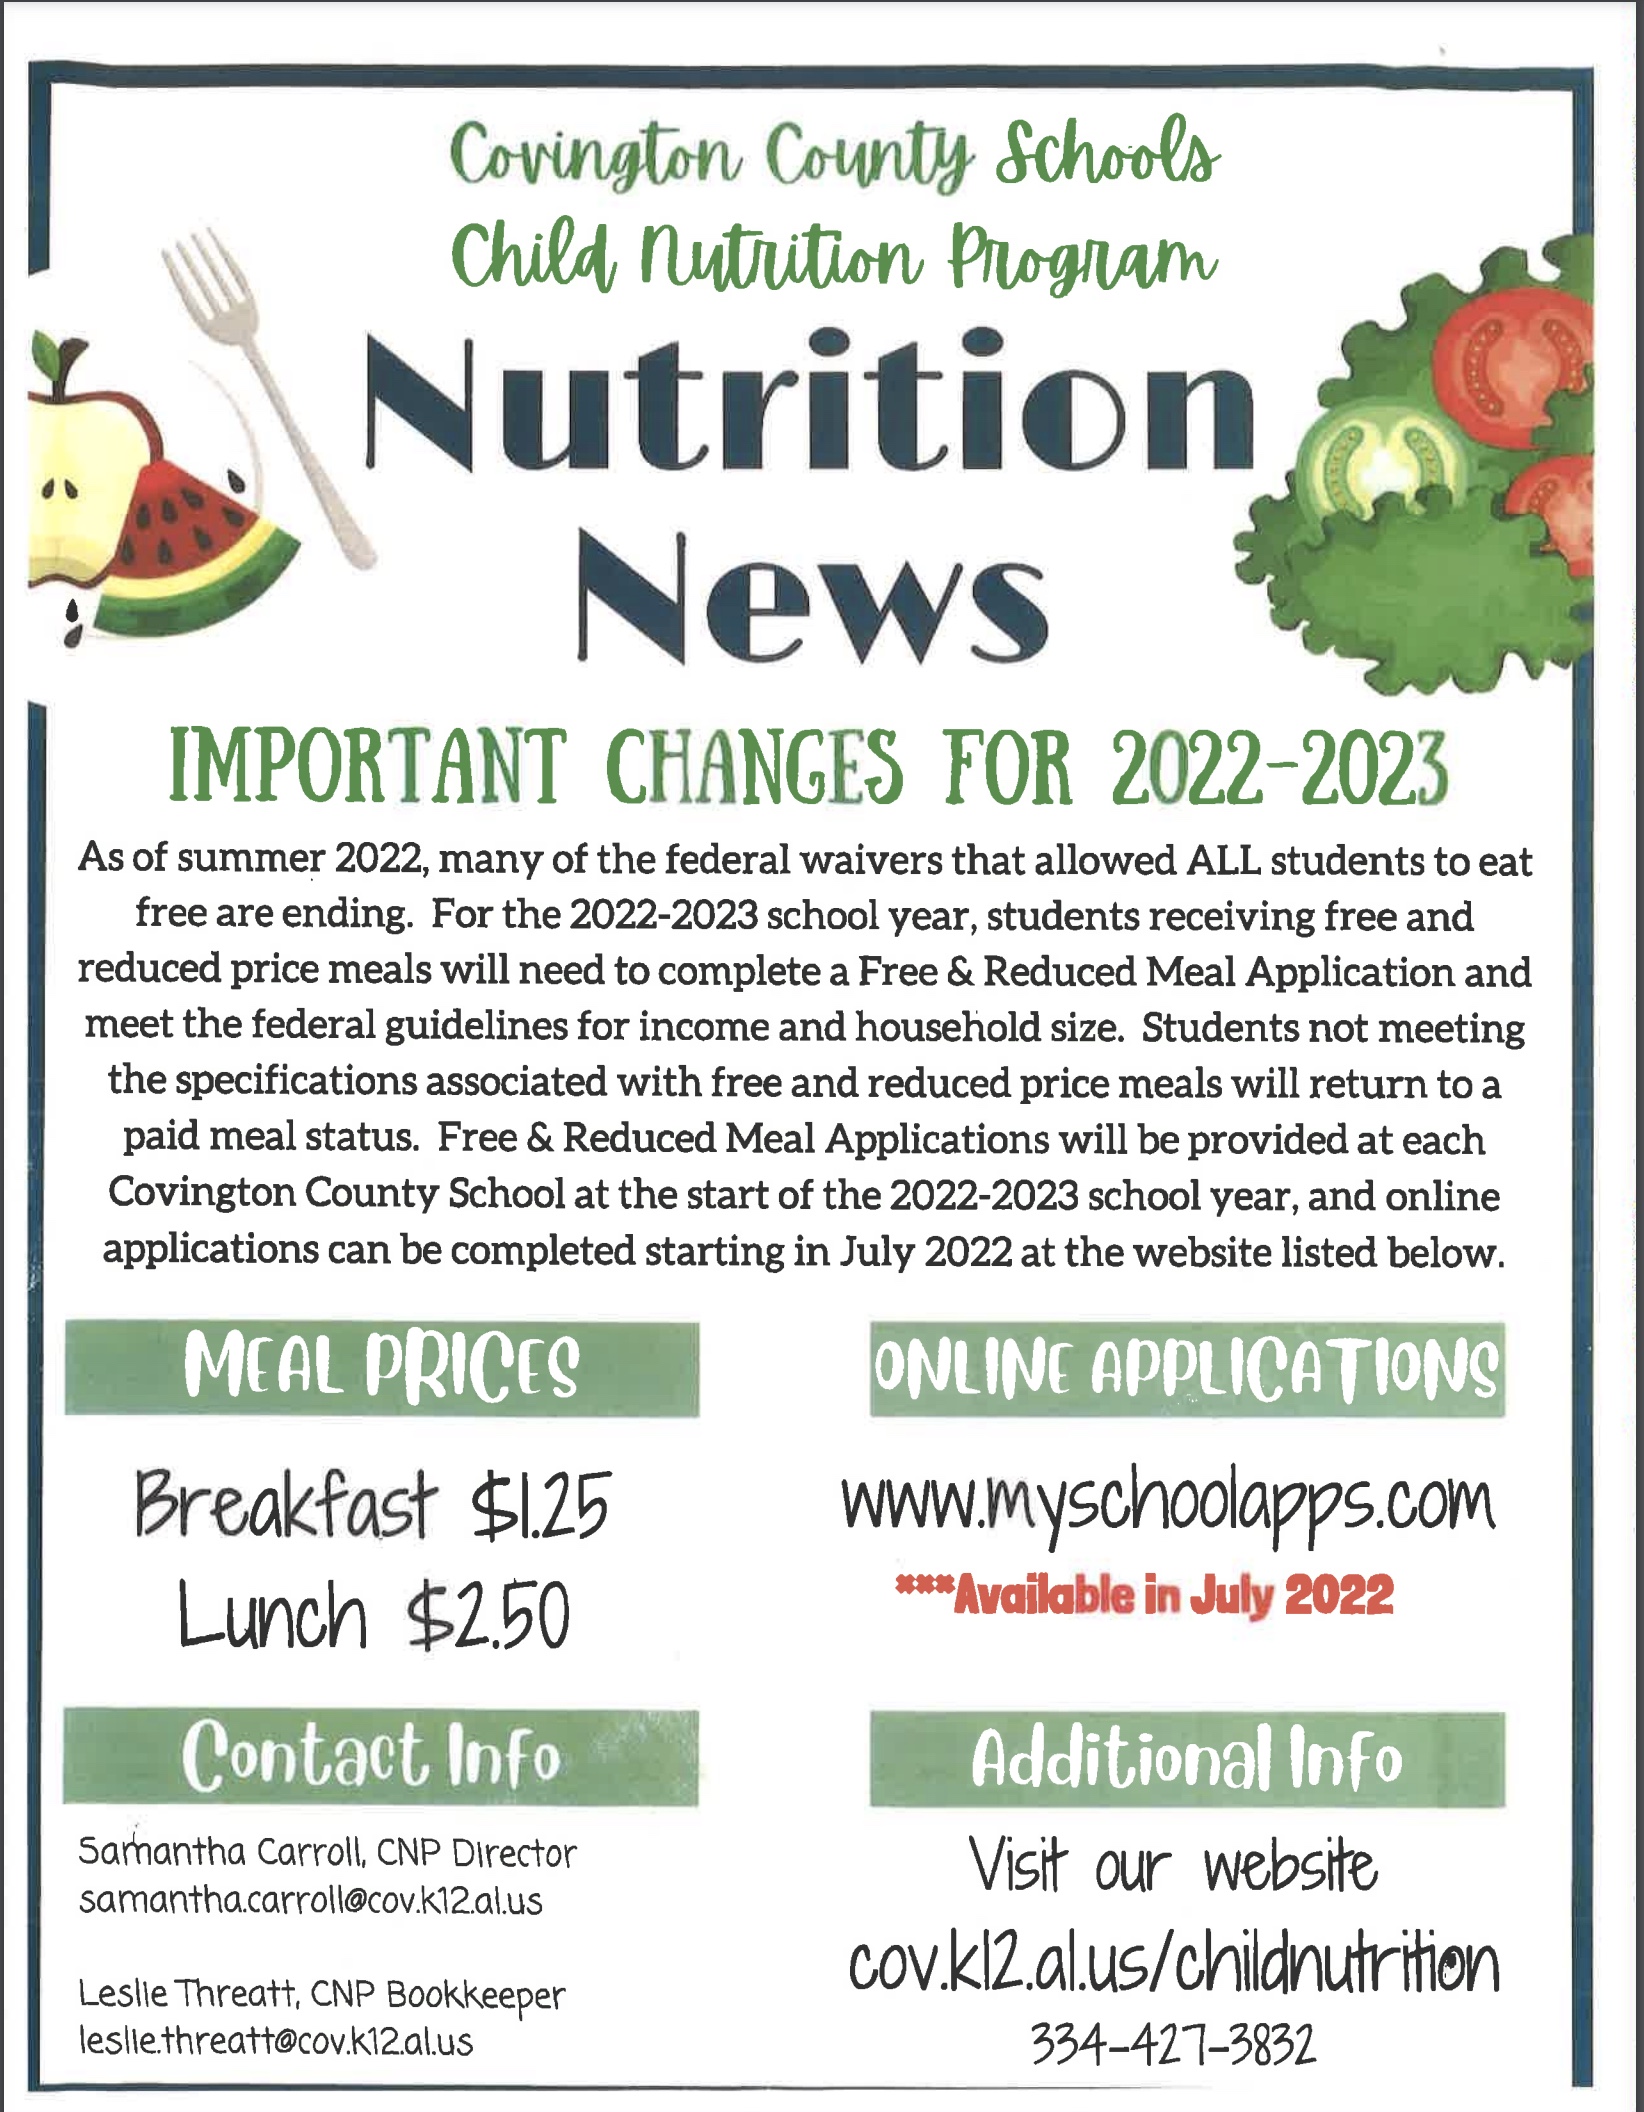 Nutrition News - Free Lunch for ALL students with federal waivers ending